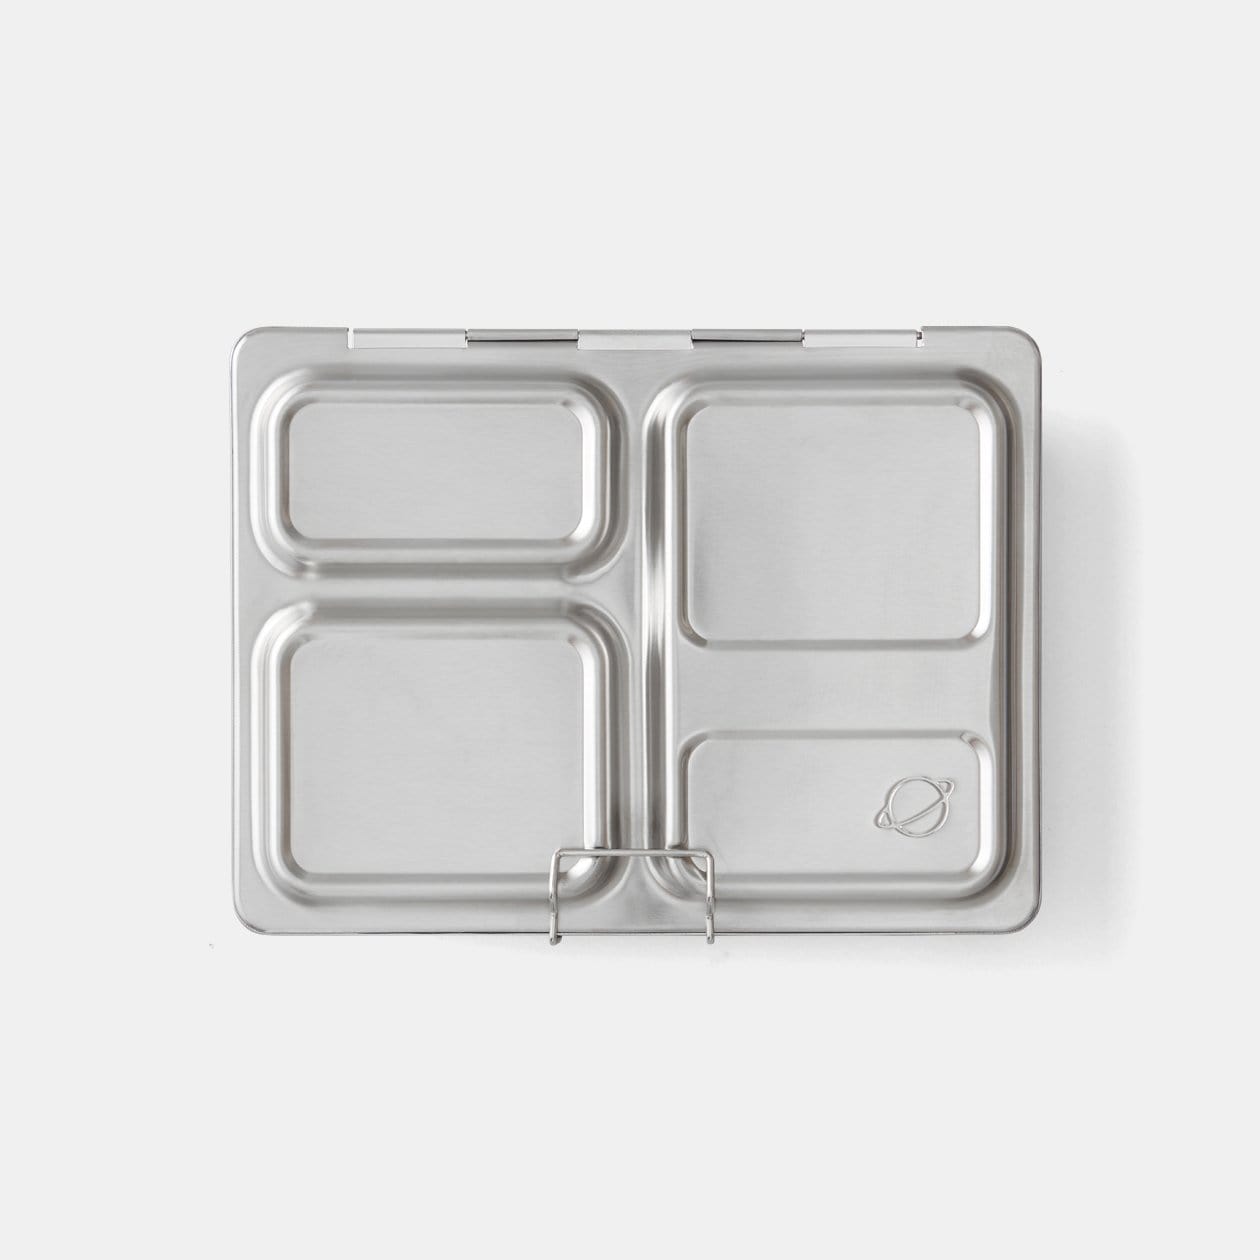 PlanetBox Stainless Steel Bento Box: Launch 